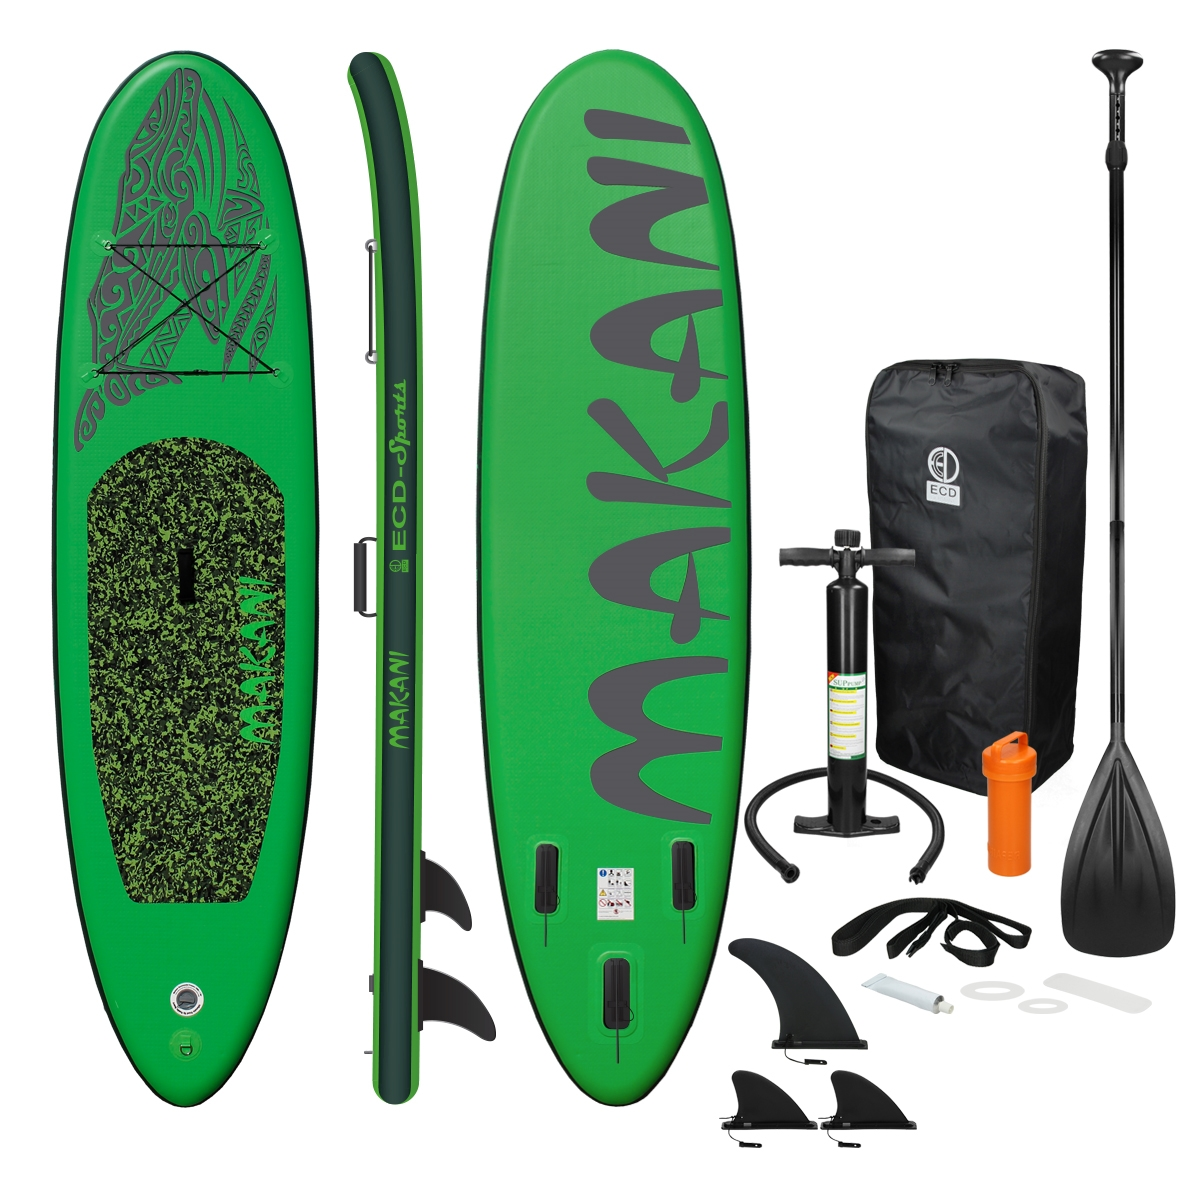 ECD-GERMANY Aufblasbares Stand Up Green Paddle Up Paddle, Grün Stand Board